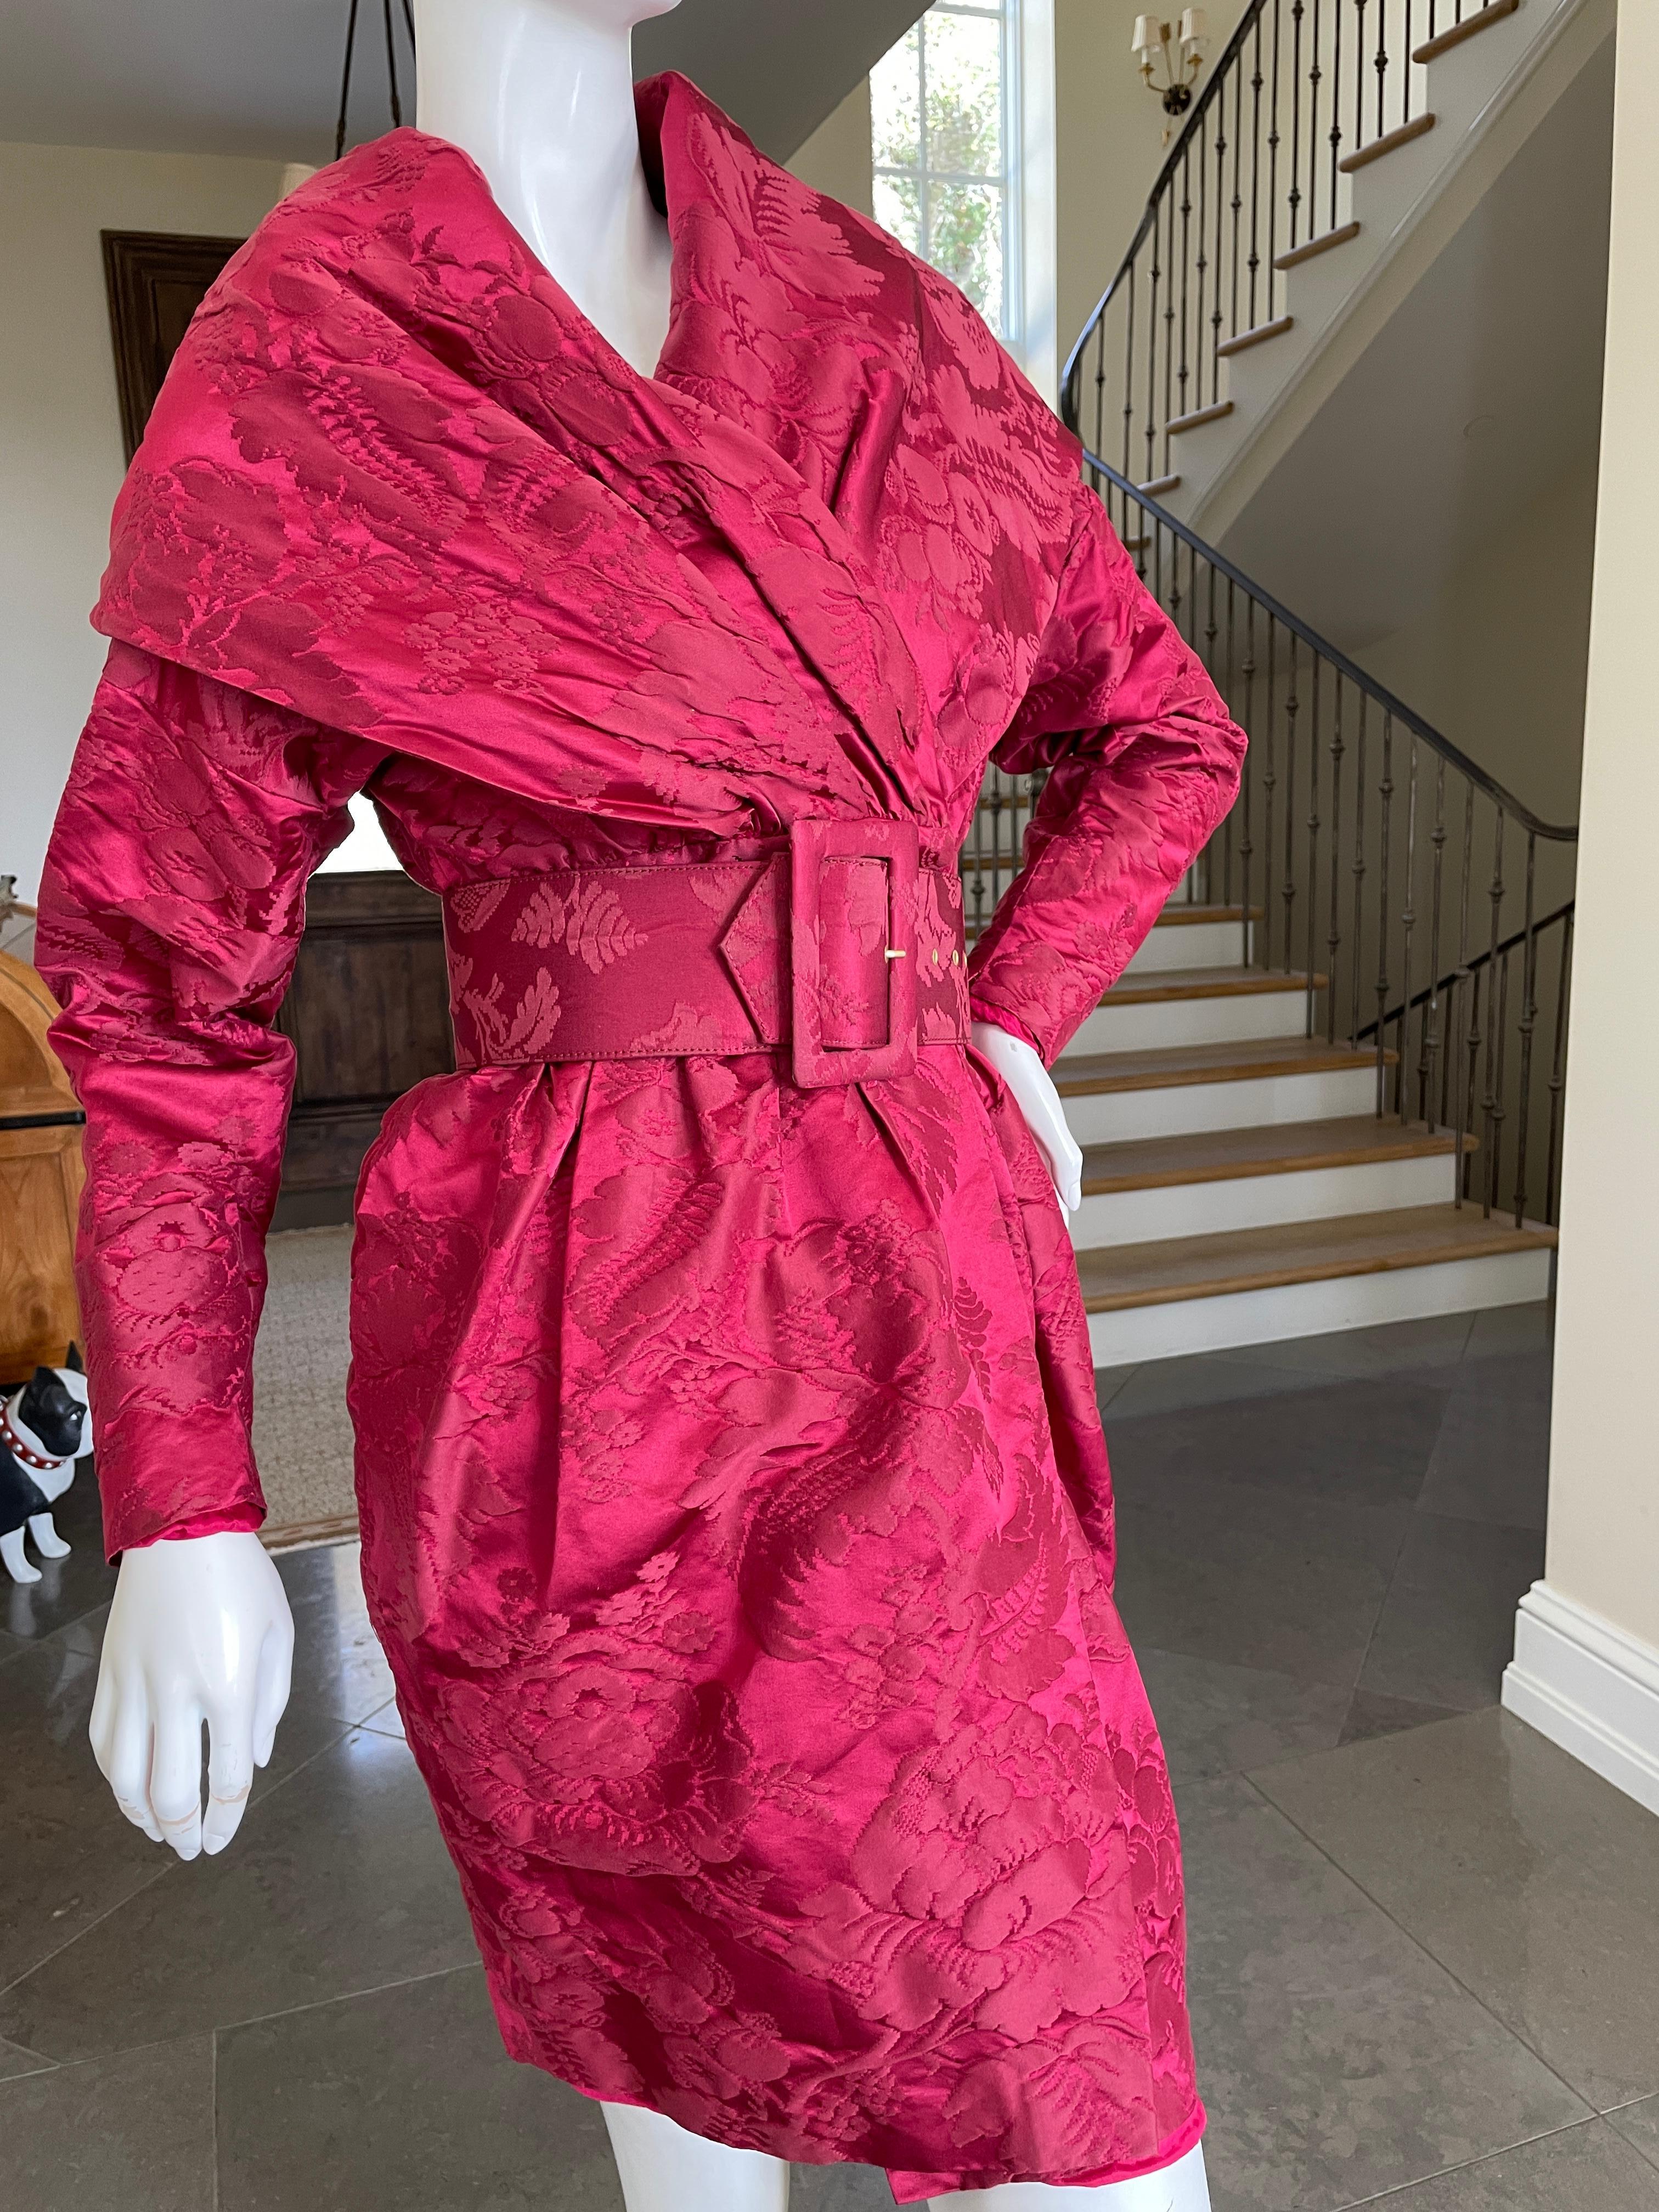 Christian Lacroix Luxe Collection Fall 1988 Vermillion Jacquard Belted Dress  1